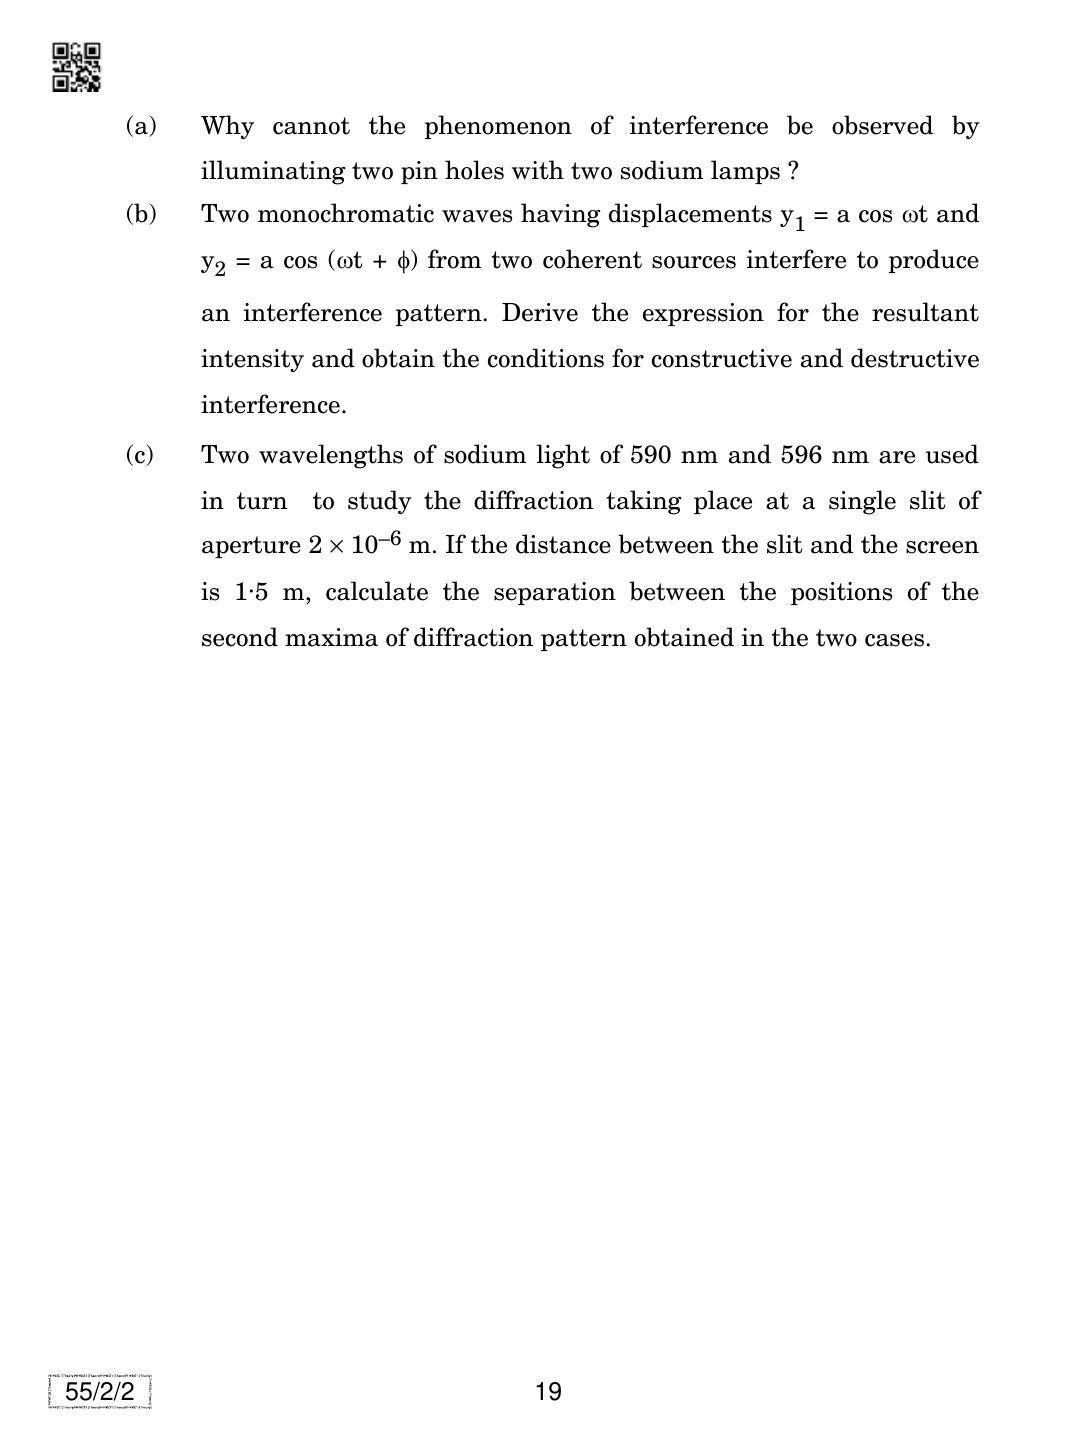 CBSE Class 12 55-2-2 Physics 2019 Question Paper - Page 19